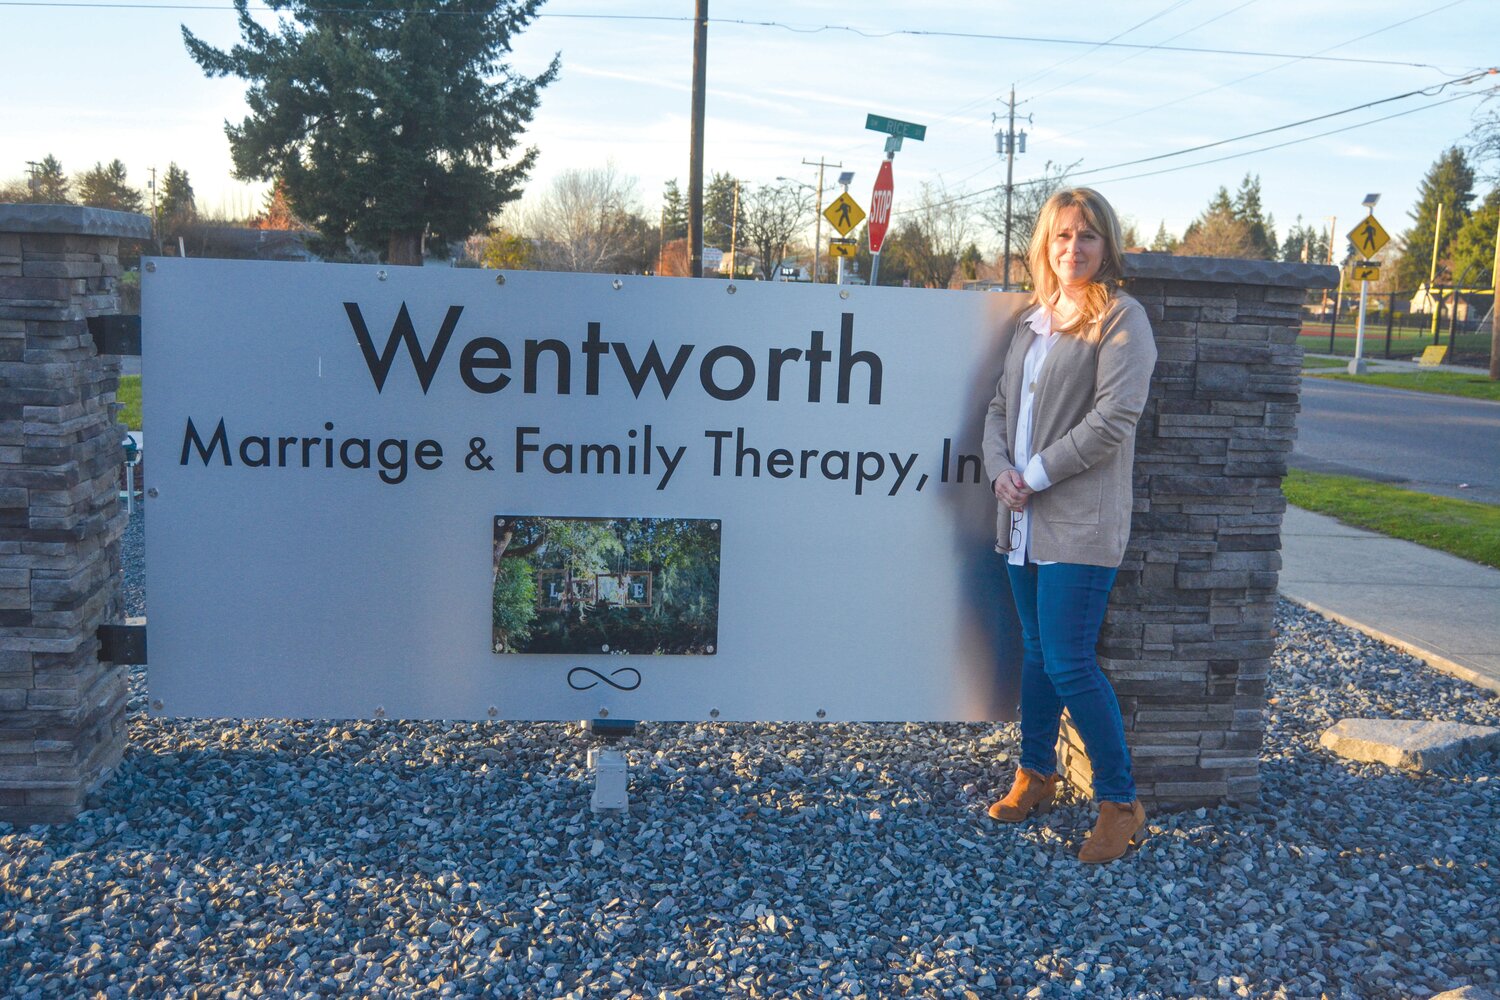 Jennifer Wentworth stands with her sign in front of her business, located at 313 W. Yelm Ave., on Nov. 16.